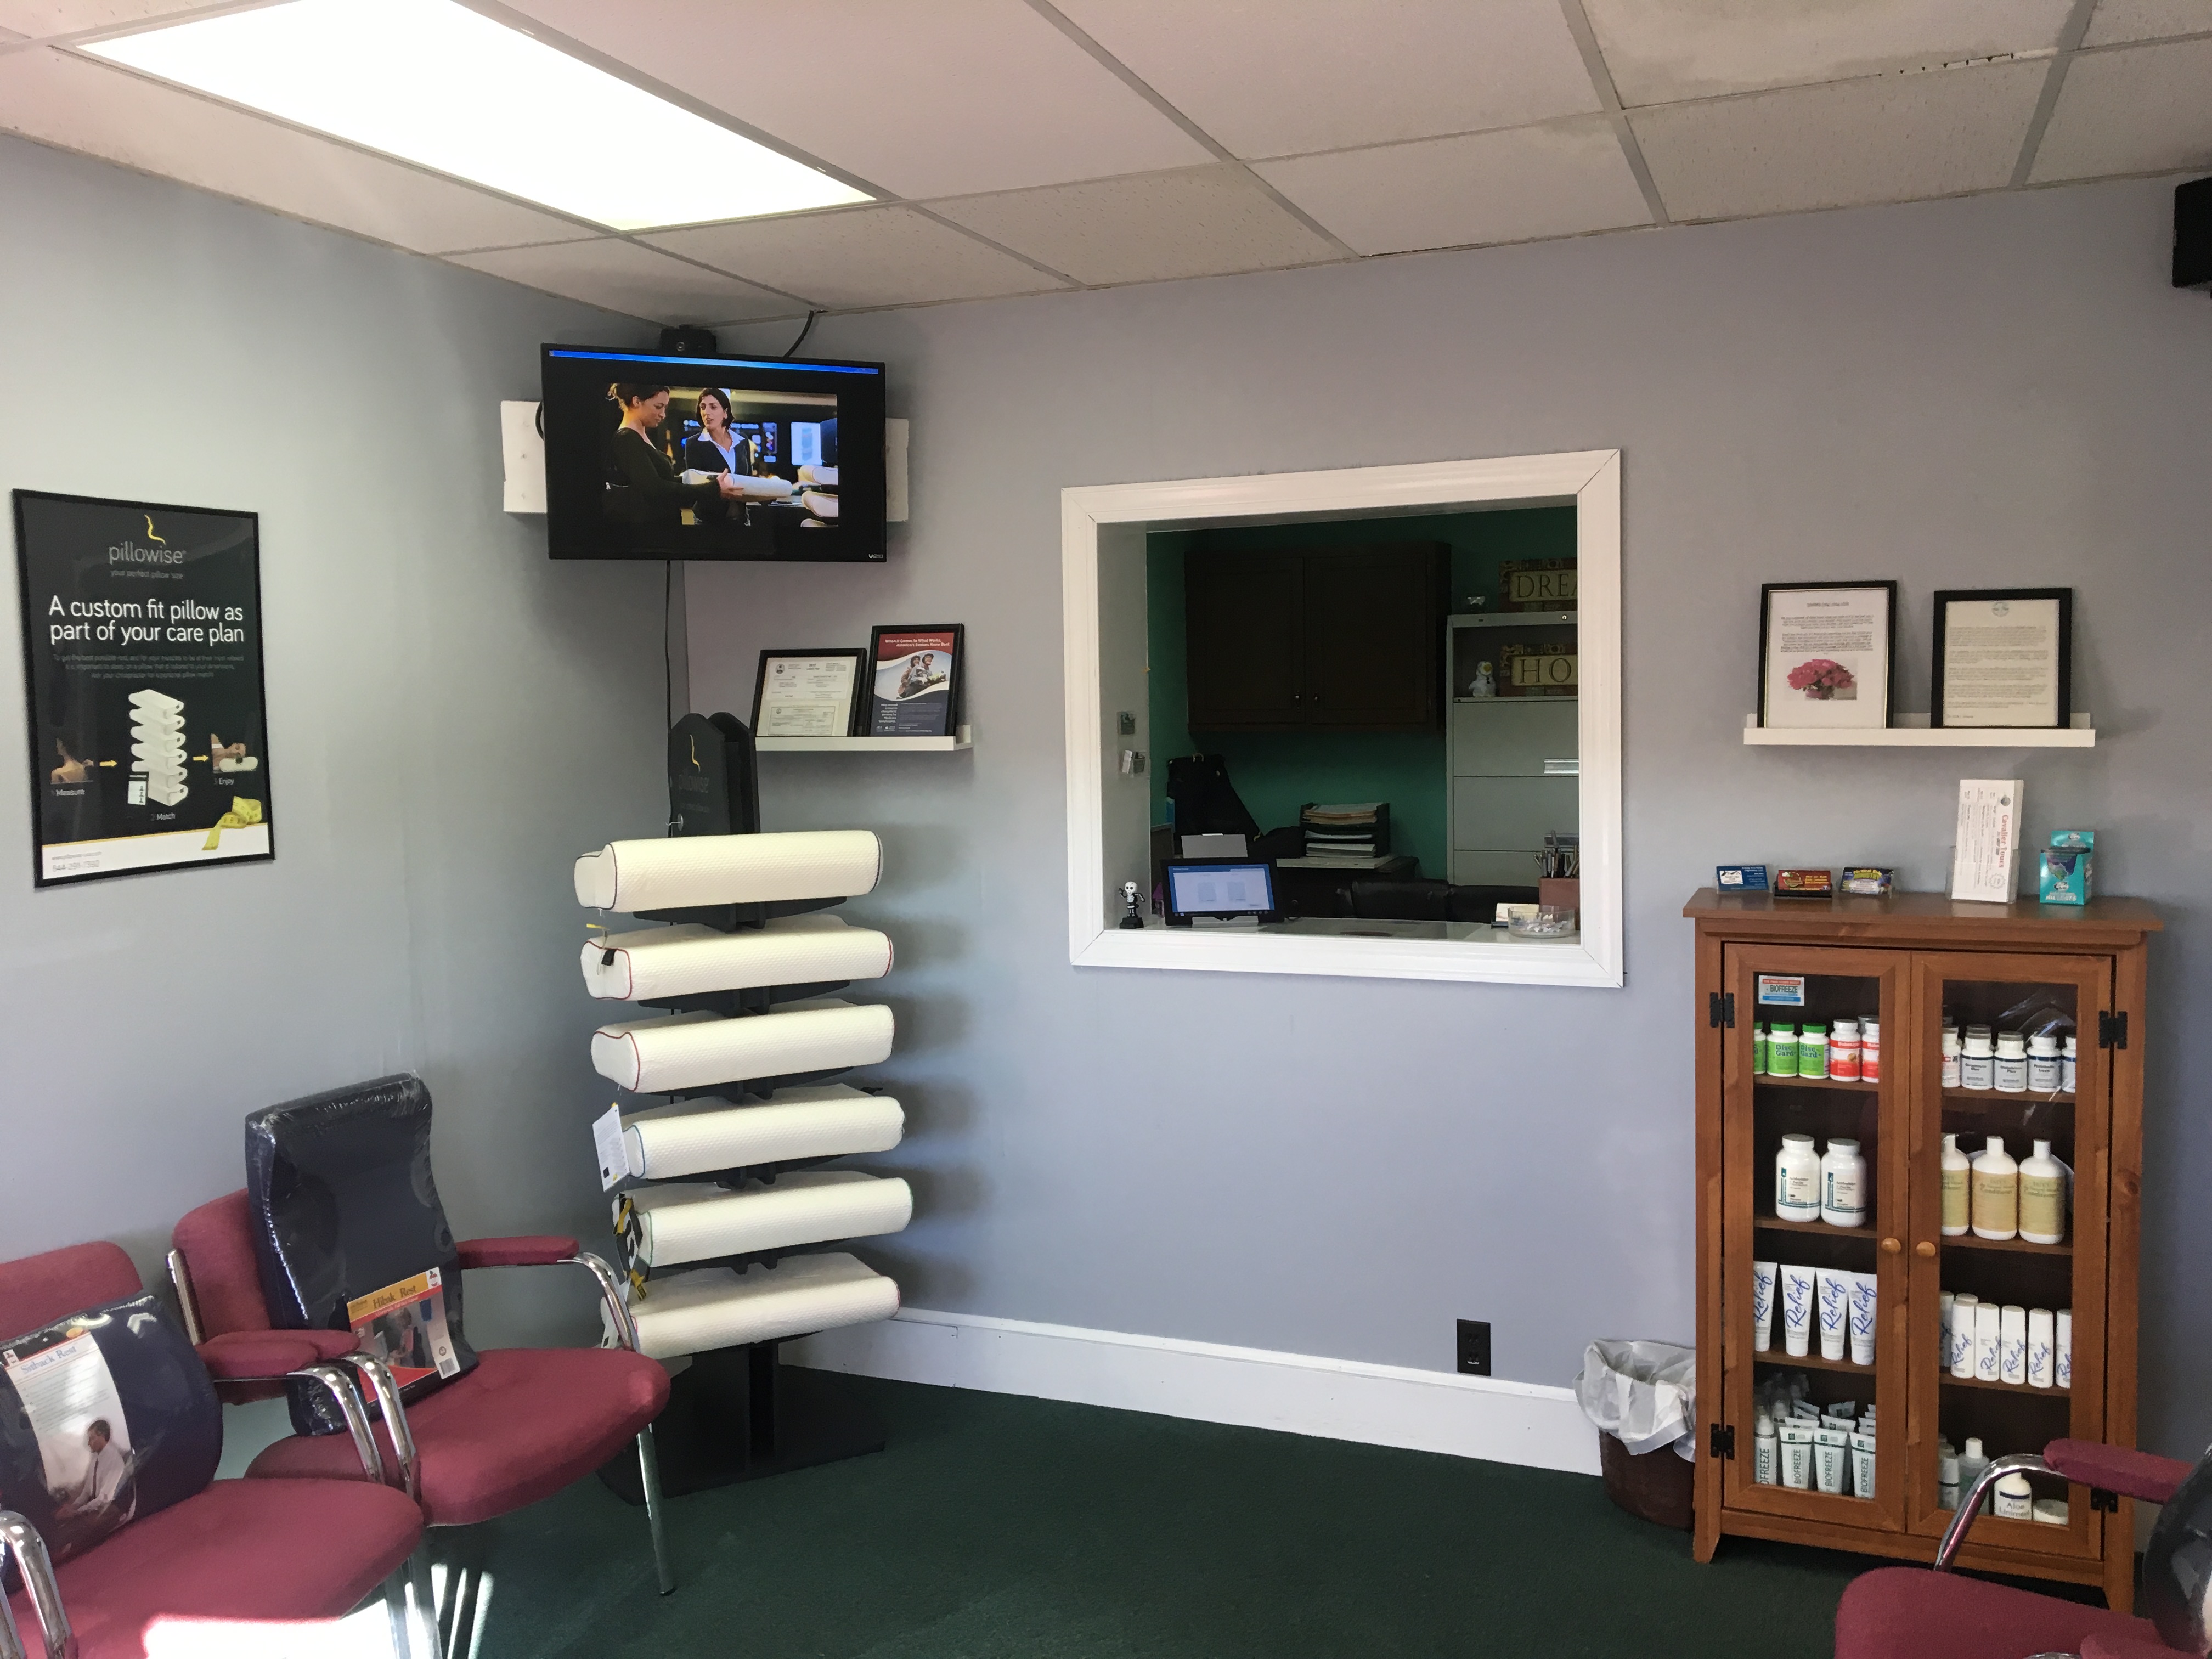 Timberlake Chiropractic Services in Lynchburg, Virginia Manual Adjustments and Therapuetic Services